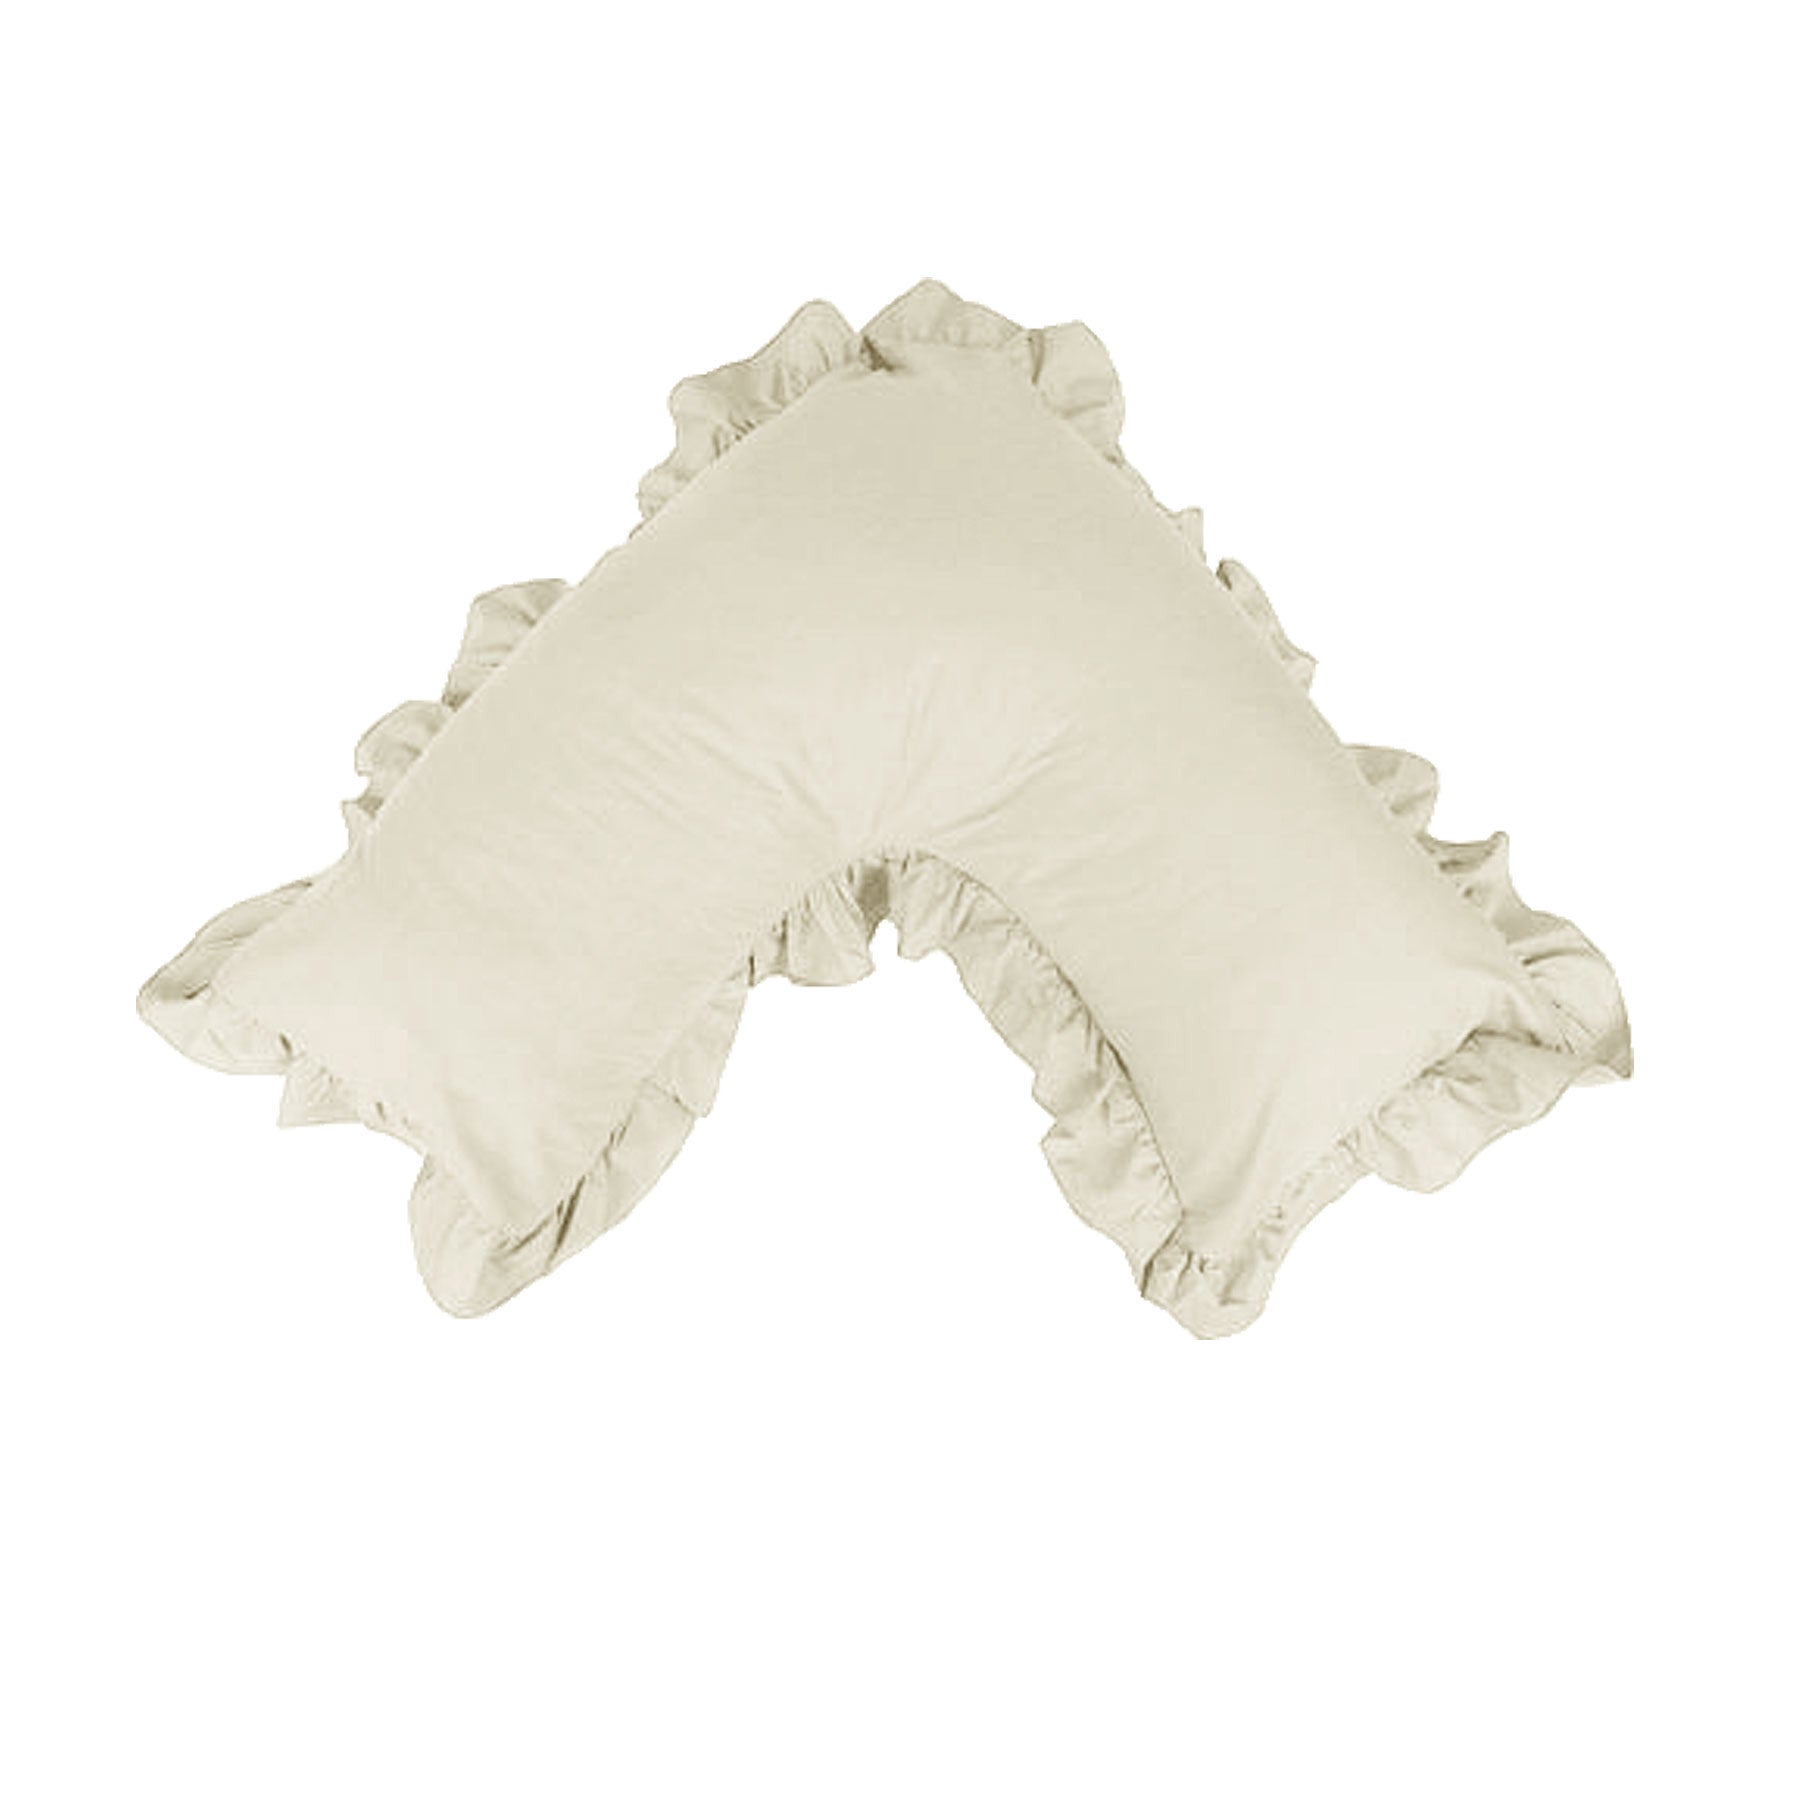 Polyester Cotton V Shape Ruffle Pillowcase by Artex available in 6 Different Colors